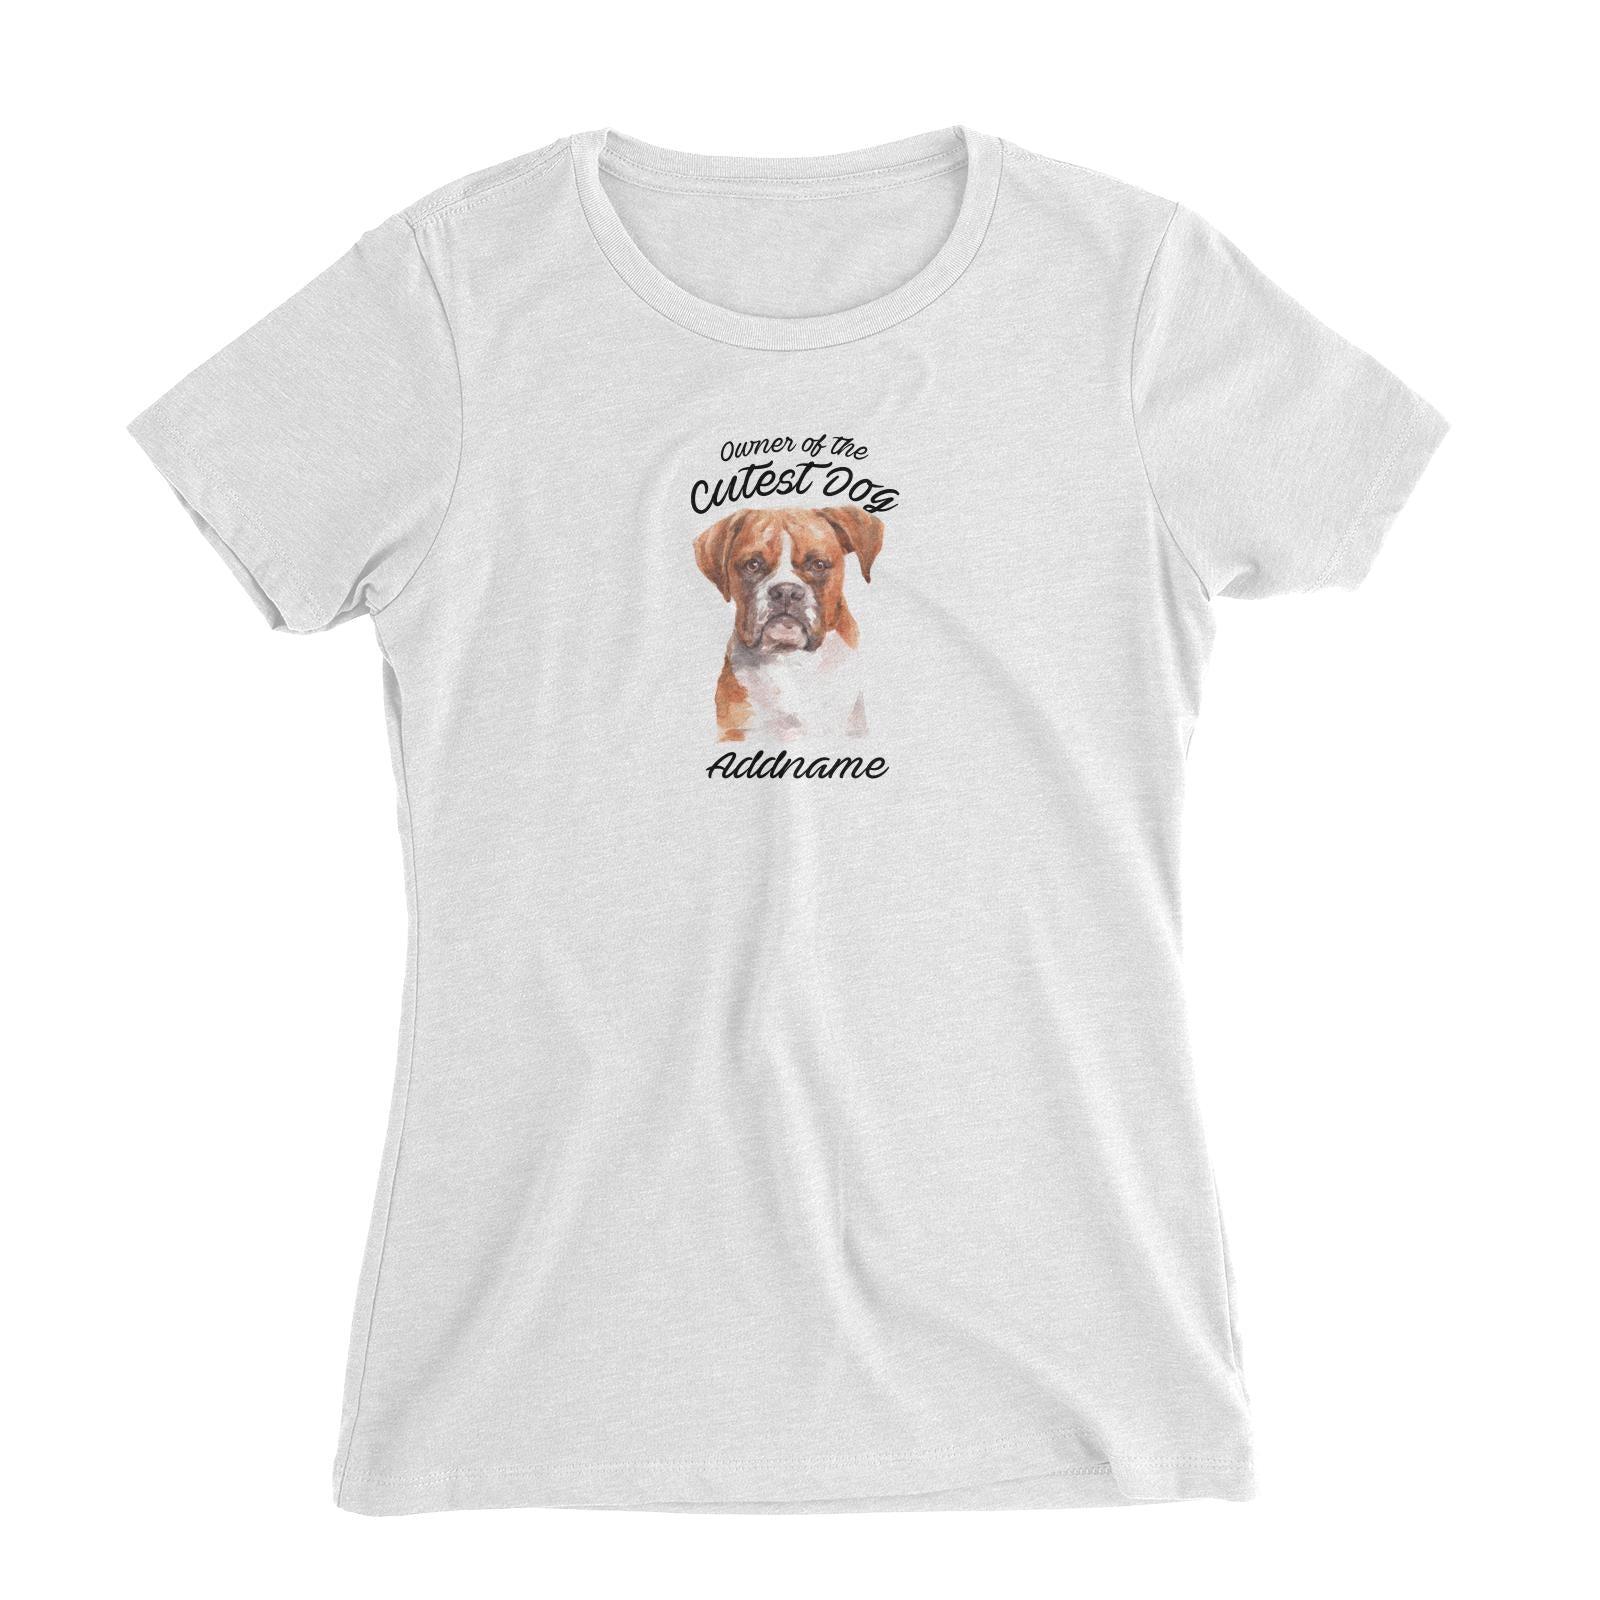 Watercolor Dog Owner Of The Cutest Dog Boxer Brown Ears Addname Women's Slim Fit T-Shirt